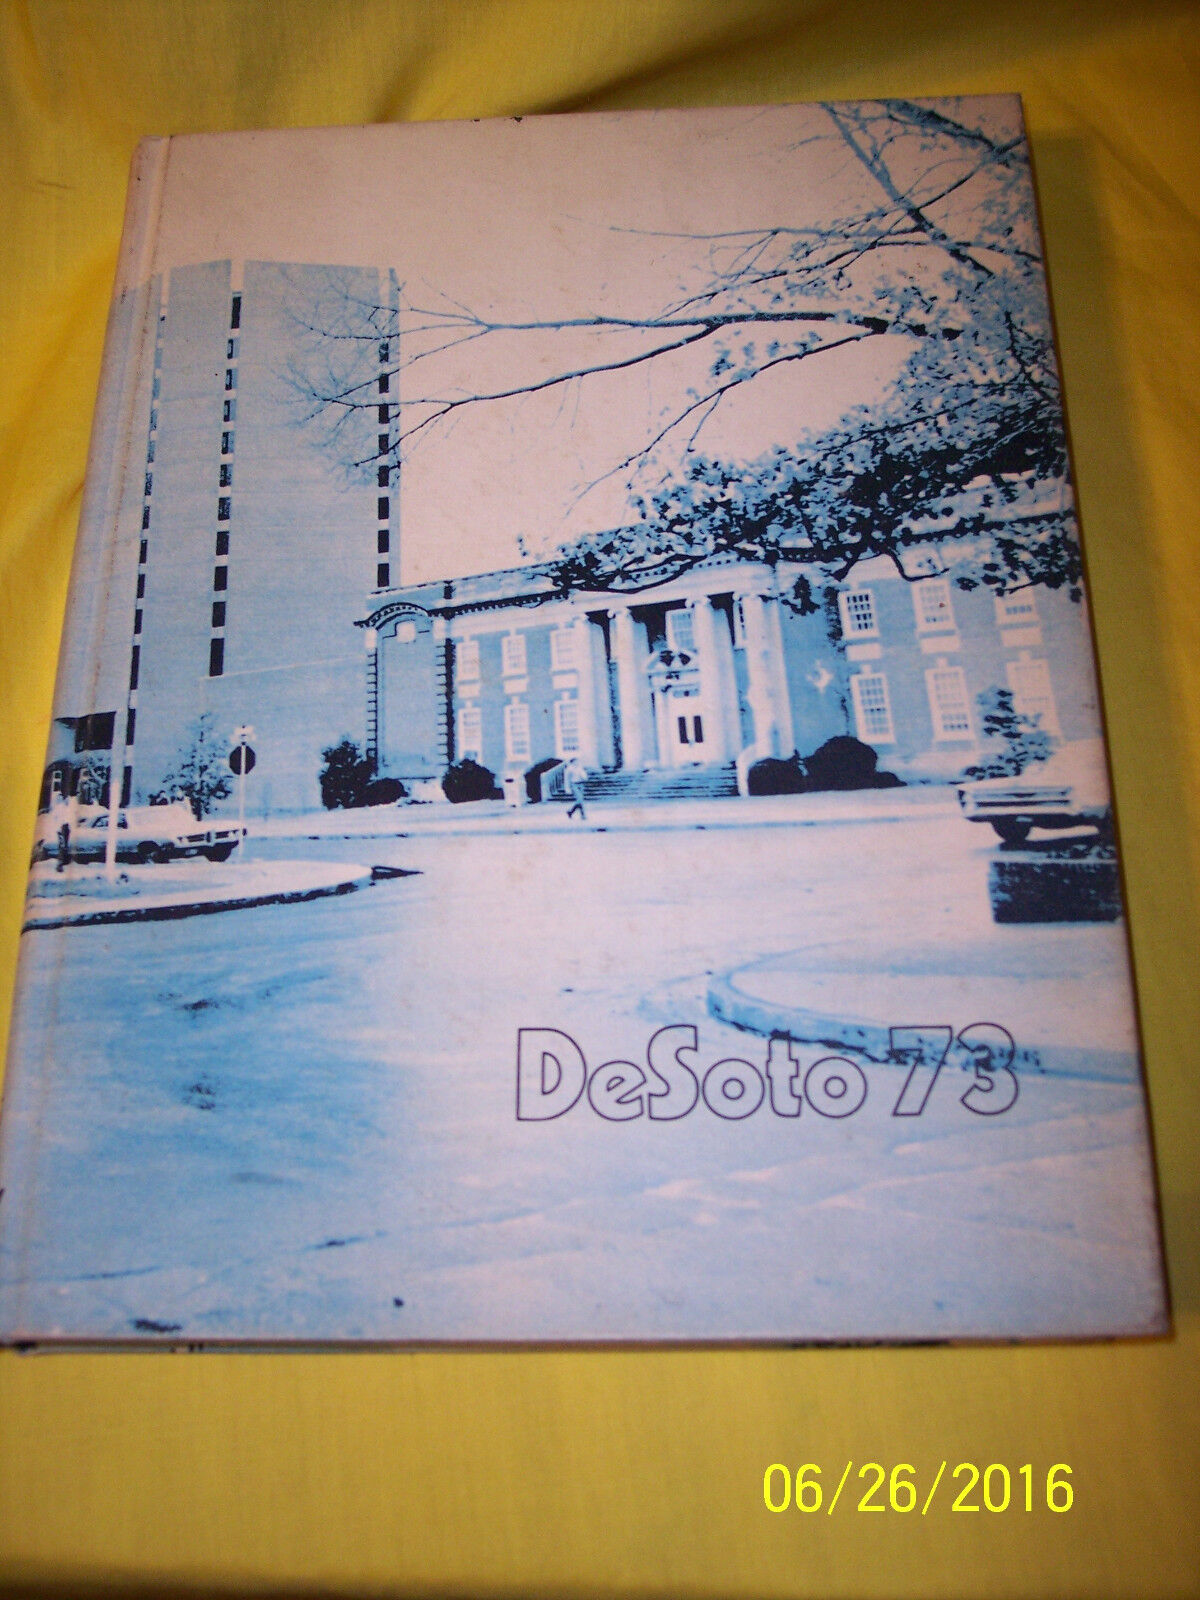 1 MEMPHIS STATE UNIVERSITY ANNUAL YEARBOOK 1973 OR 76 UNIVERSITY OF MEMPHIS